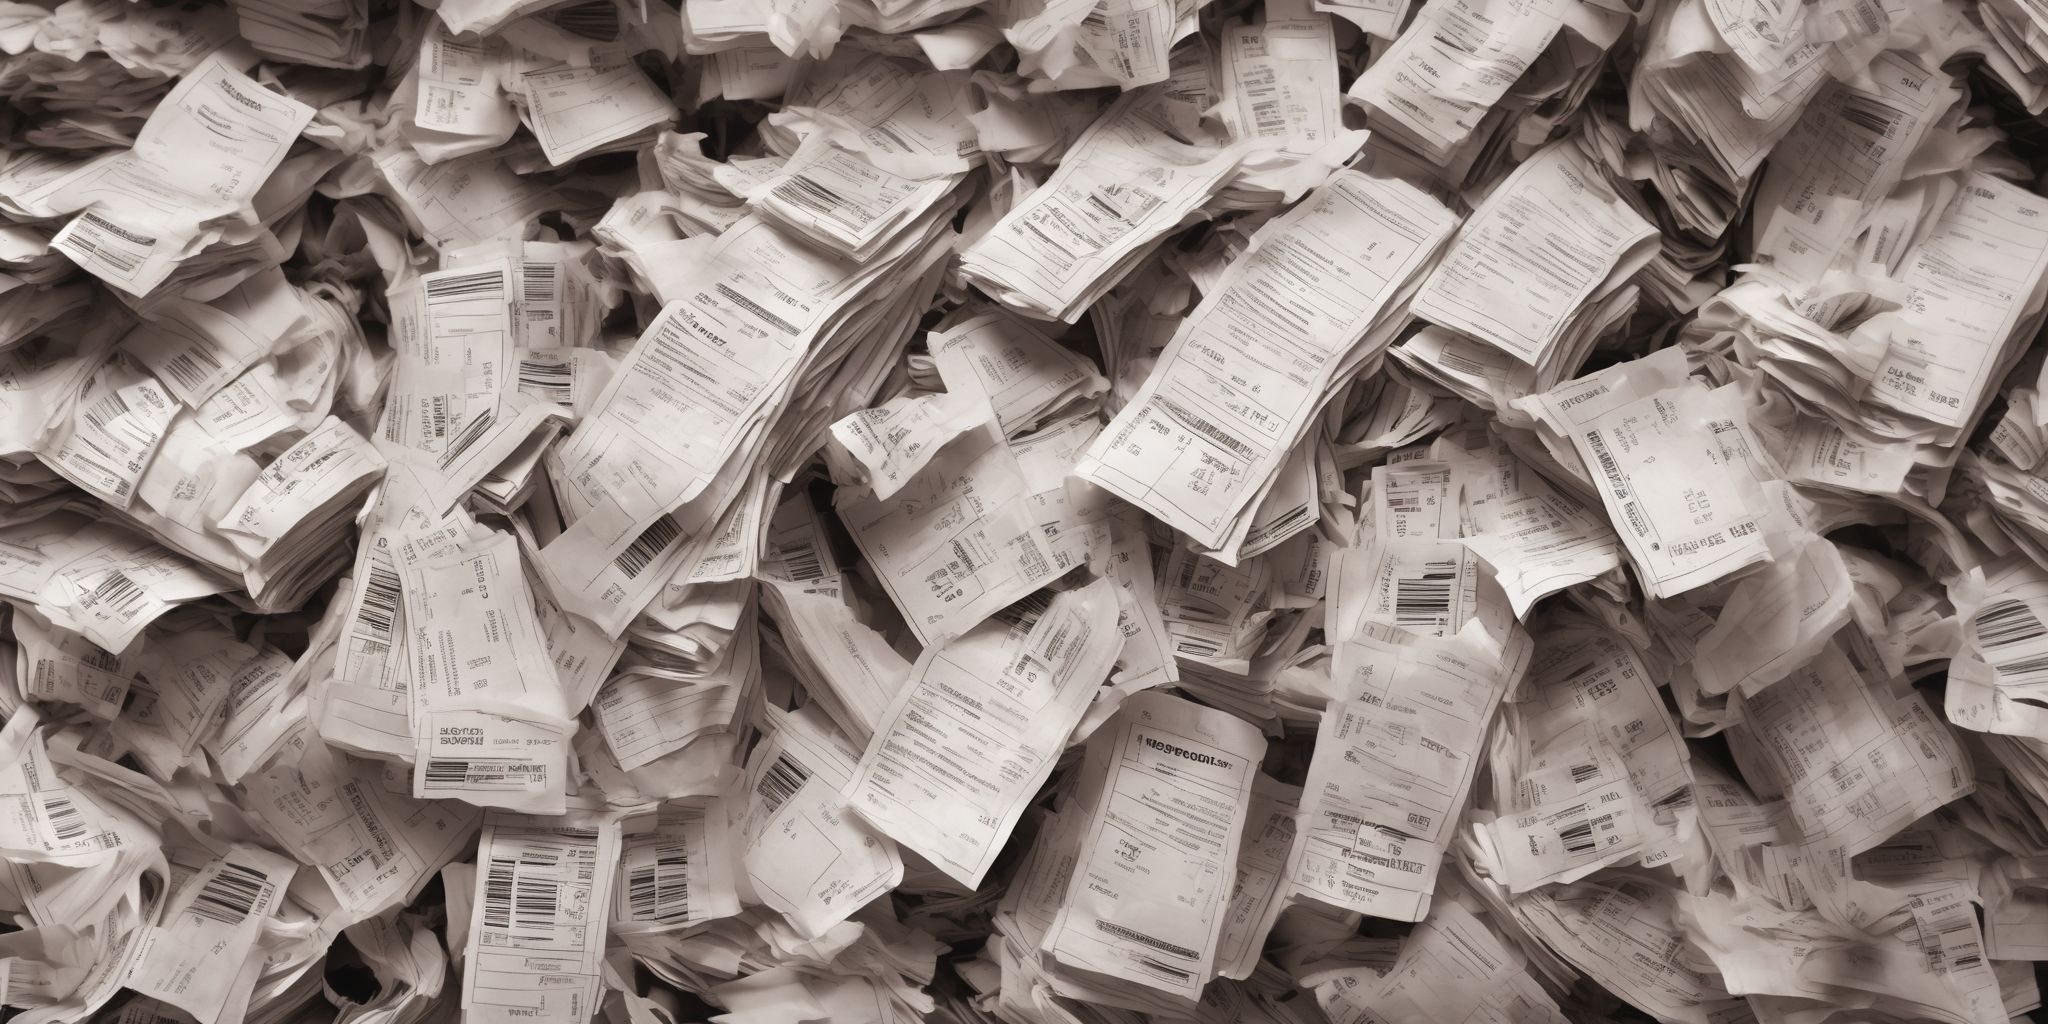 Receipt pile  in realistic, photographic style